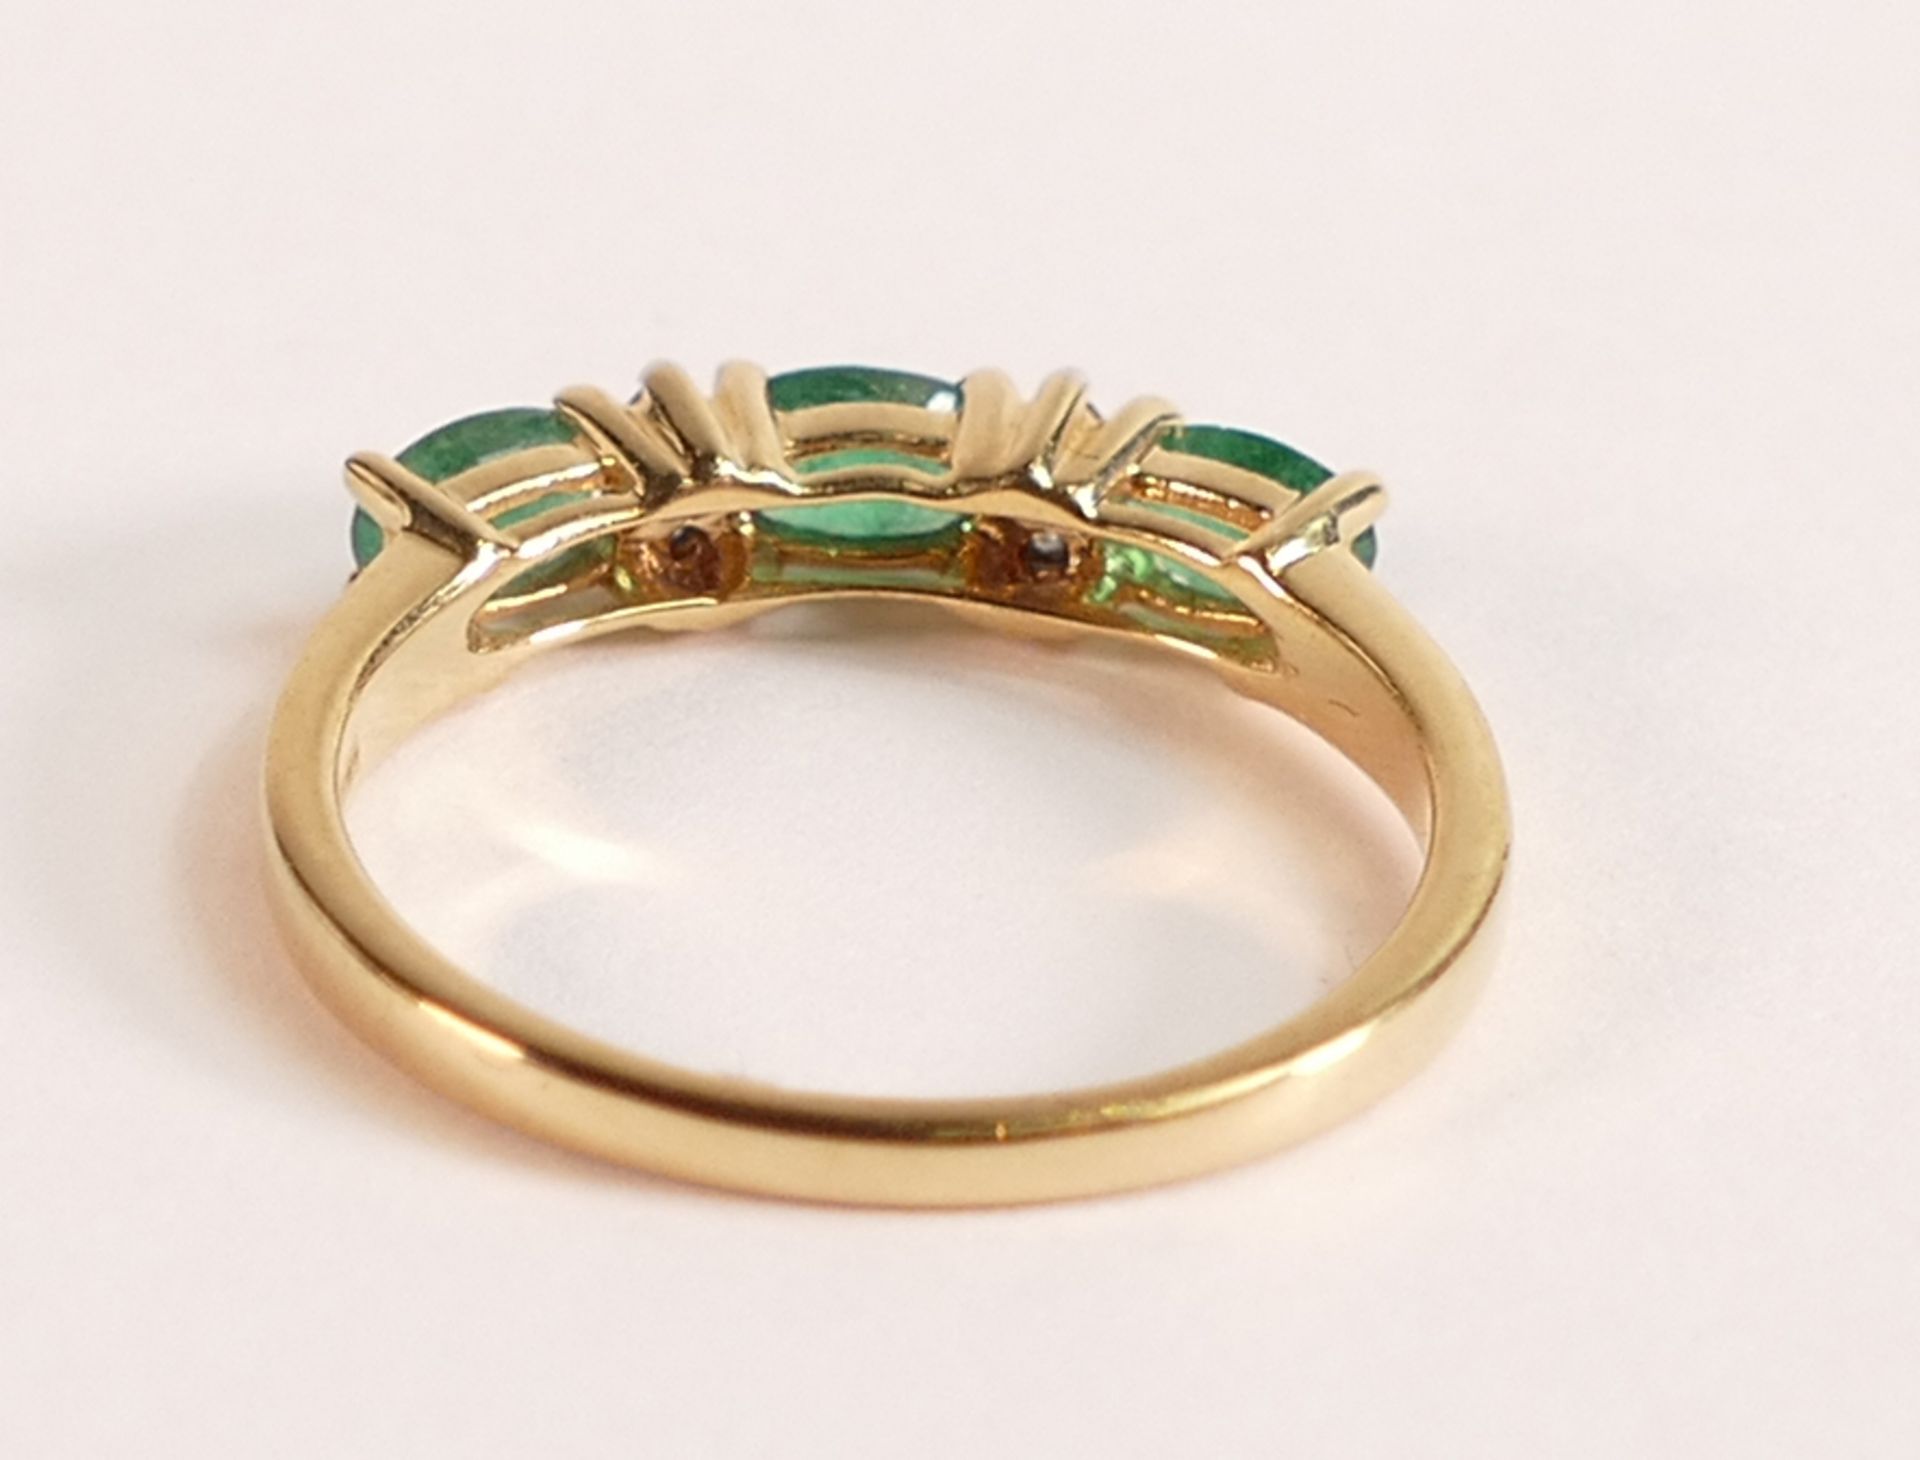 18ct Gold Ring with Marquise cut Emerald and Diamond The 18ct Gold band is stamped 750 and 18K. - Image 3 of 3